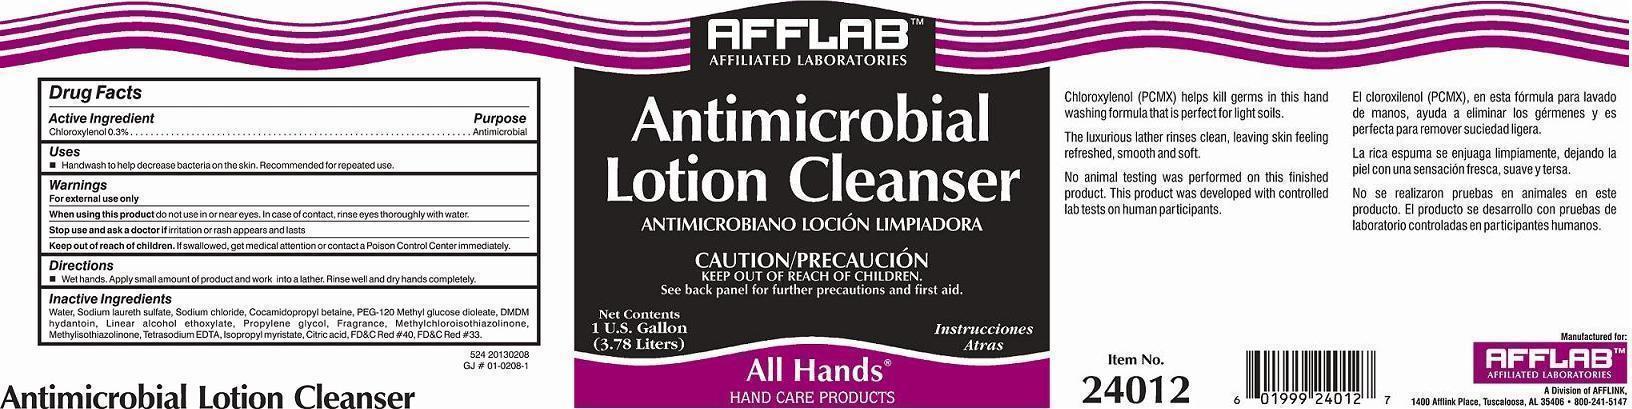 Antimicrobial Cleanser (Chloroxylenol) Soap [Afflab, Affiliated Laboratories, A Division Of Afflink]